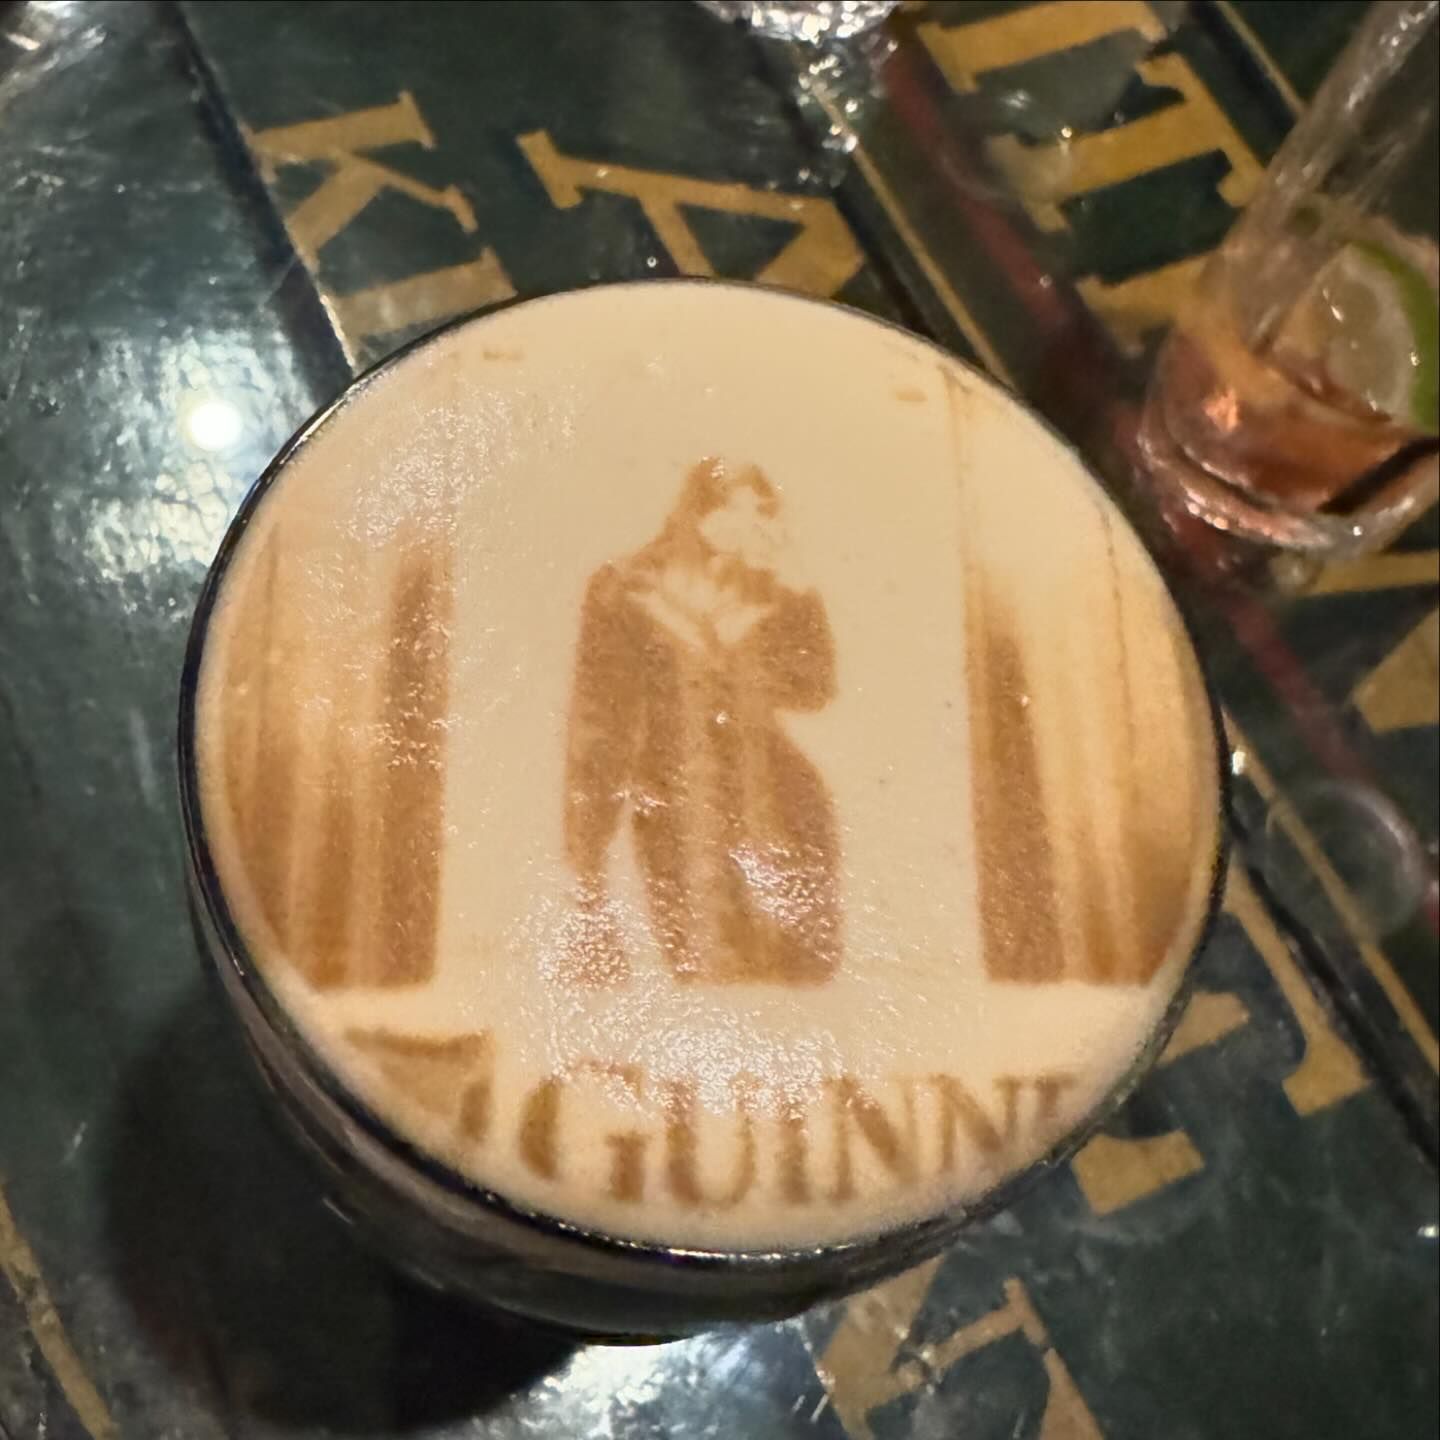 @guinness and @manieredevoir 👩‍🍳’s 💋